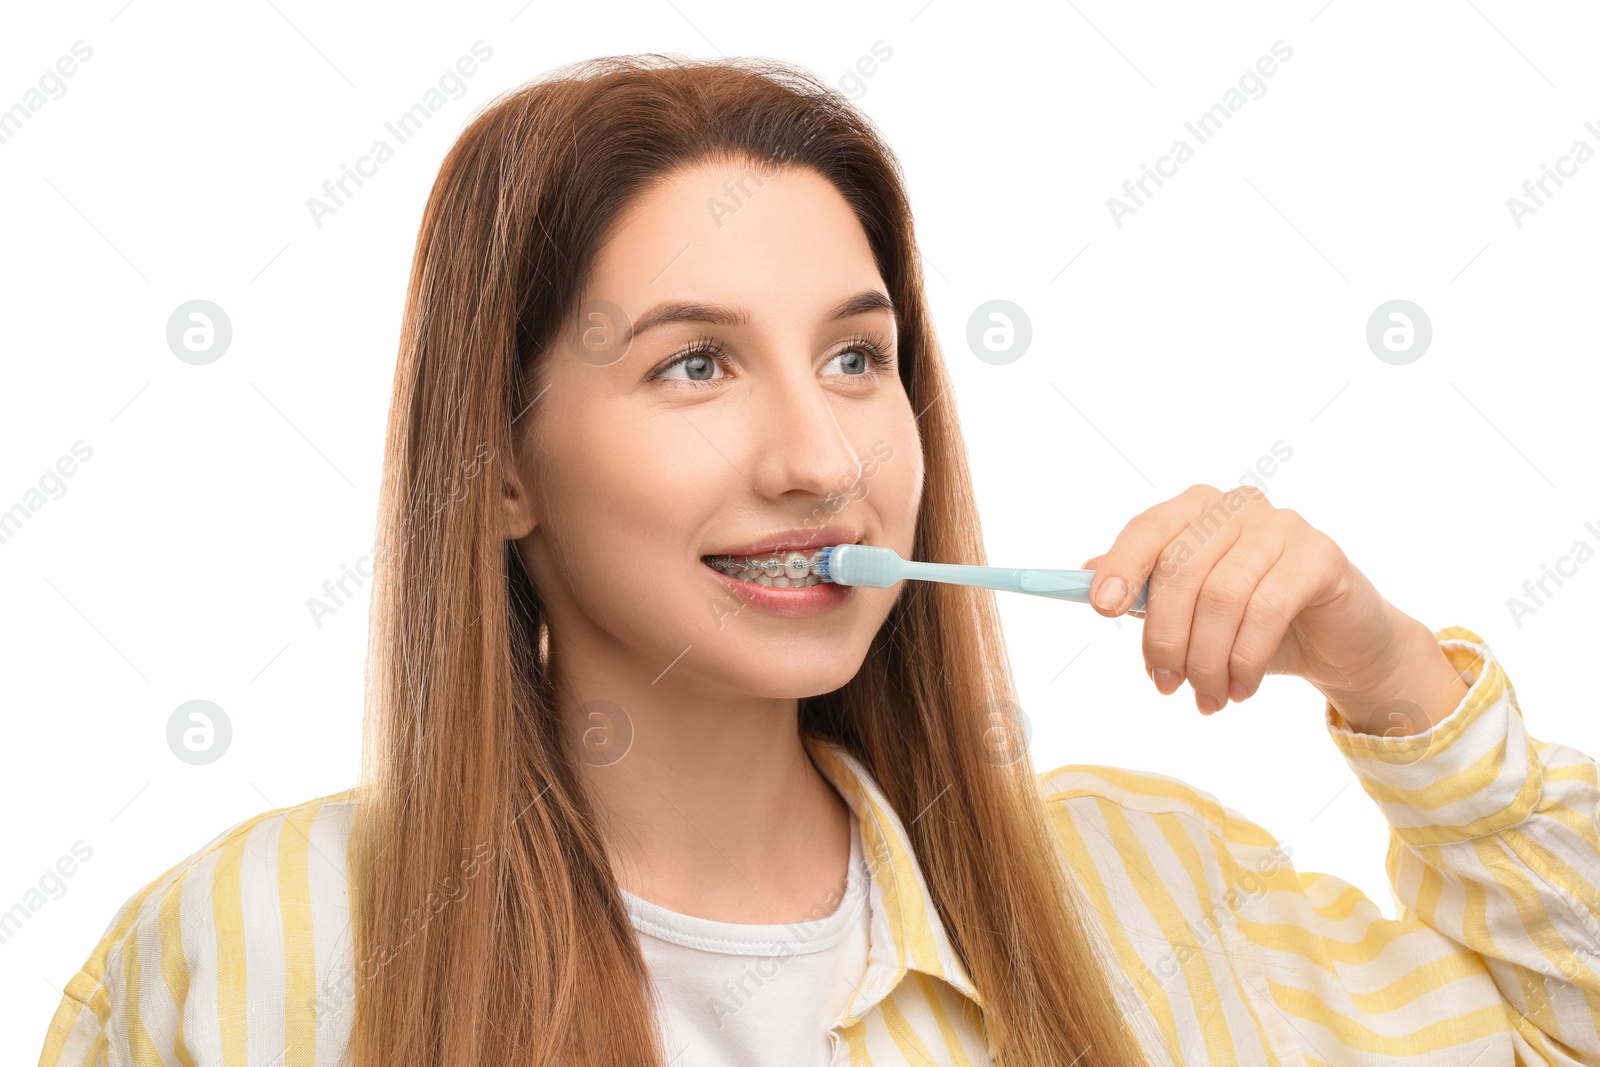 Photo of Smiling woman with dental braces cleaning teeth on white background